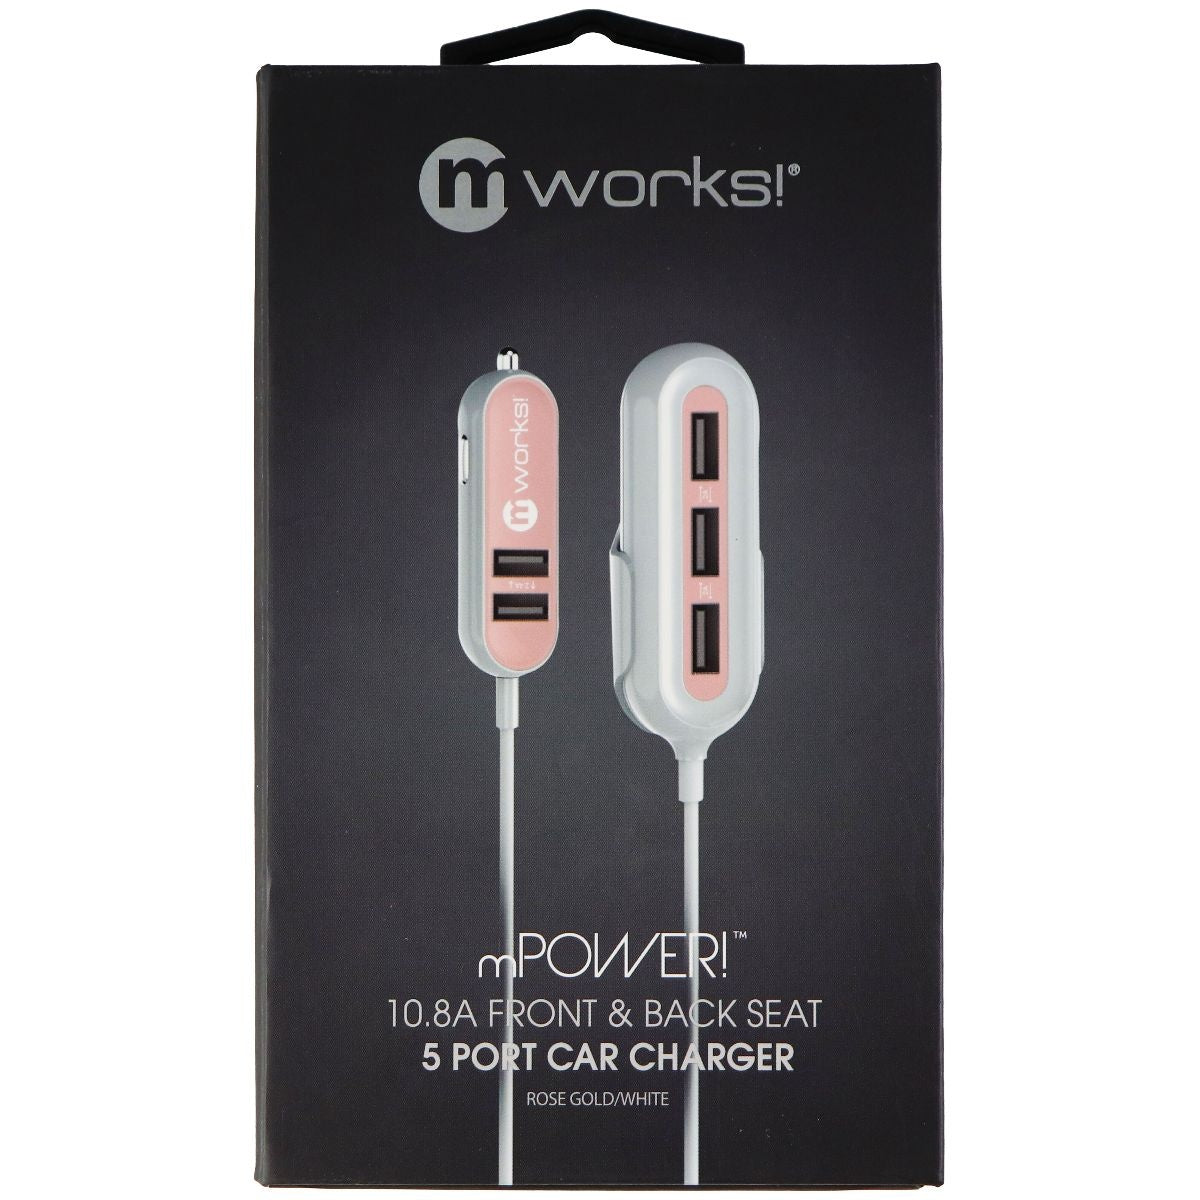 mWorks! mPOWER! 10.8A Front & Back Seat 5 Port Car Charger - Rose Gold/White Cell Phone - Chargers & Cradles mWorks!    - Simple Cell Bulk Wholesale Pricing - USA Seller